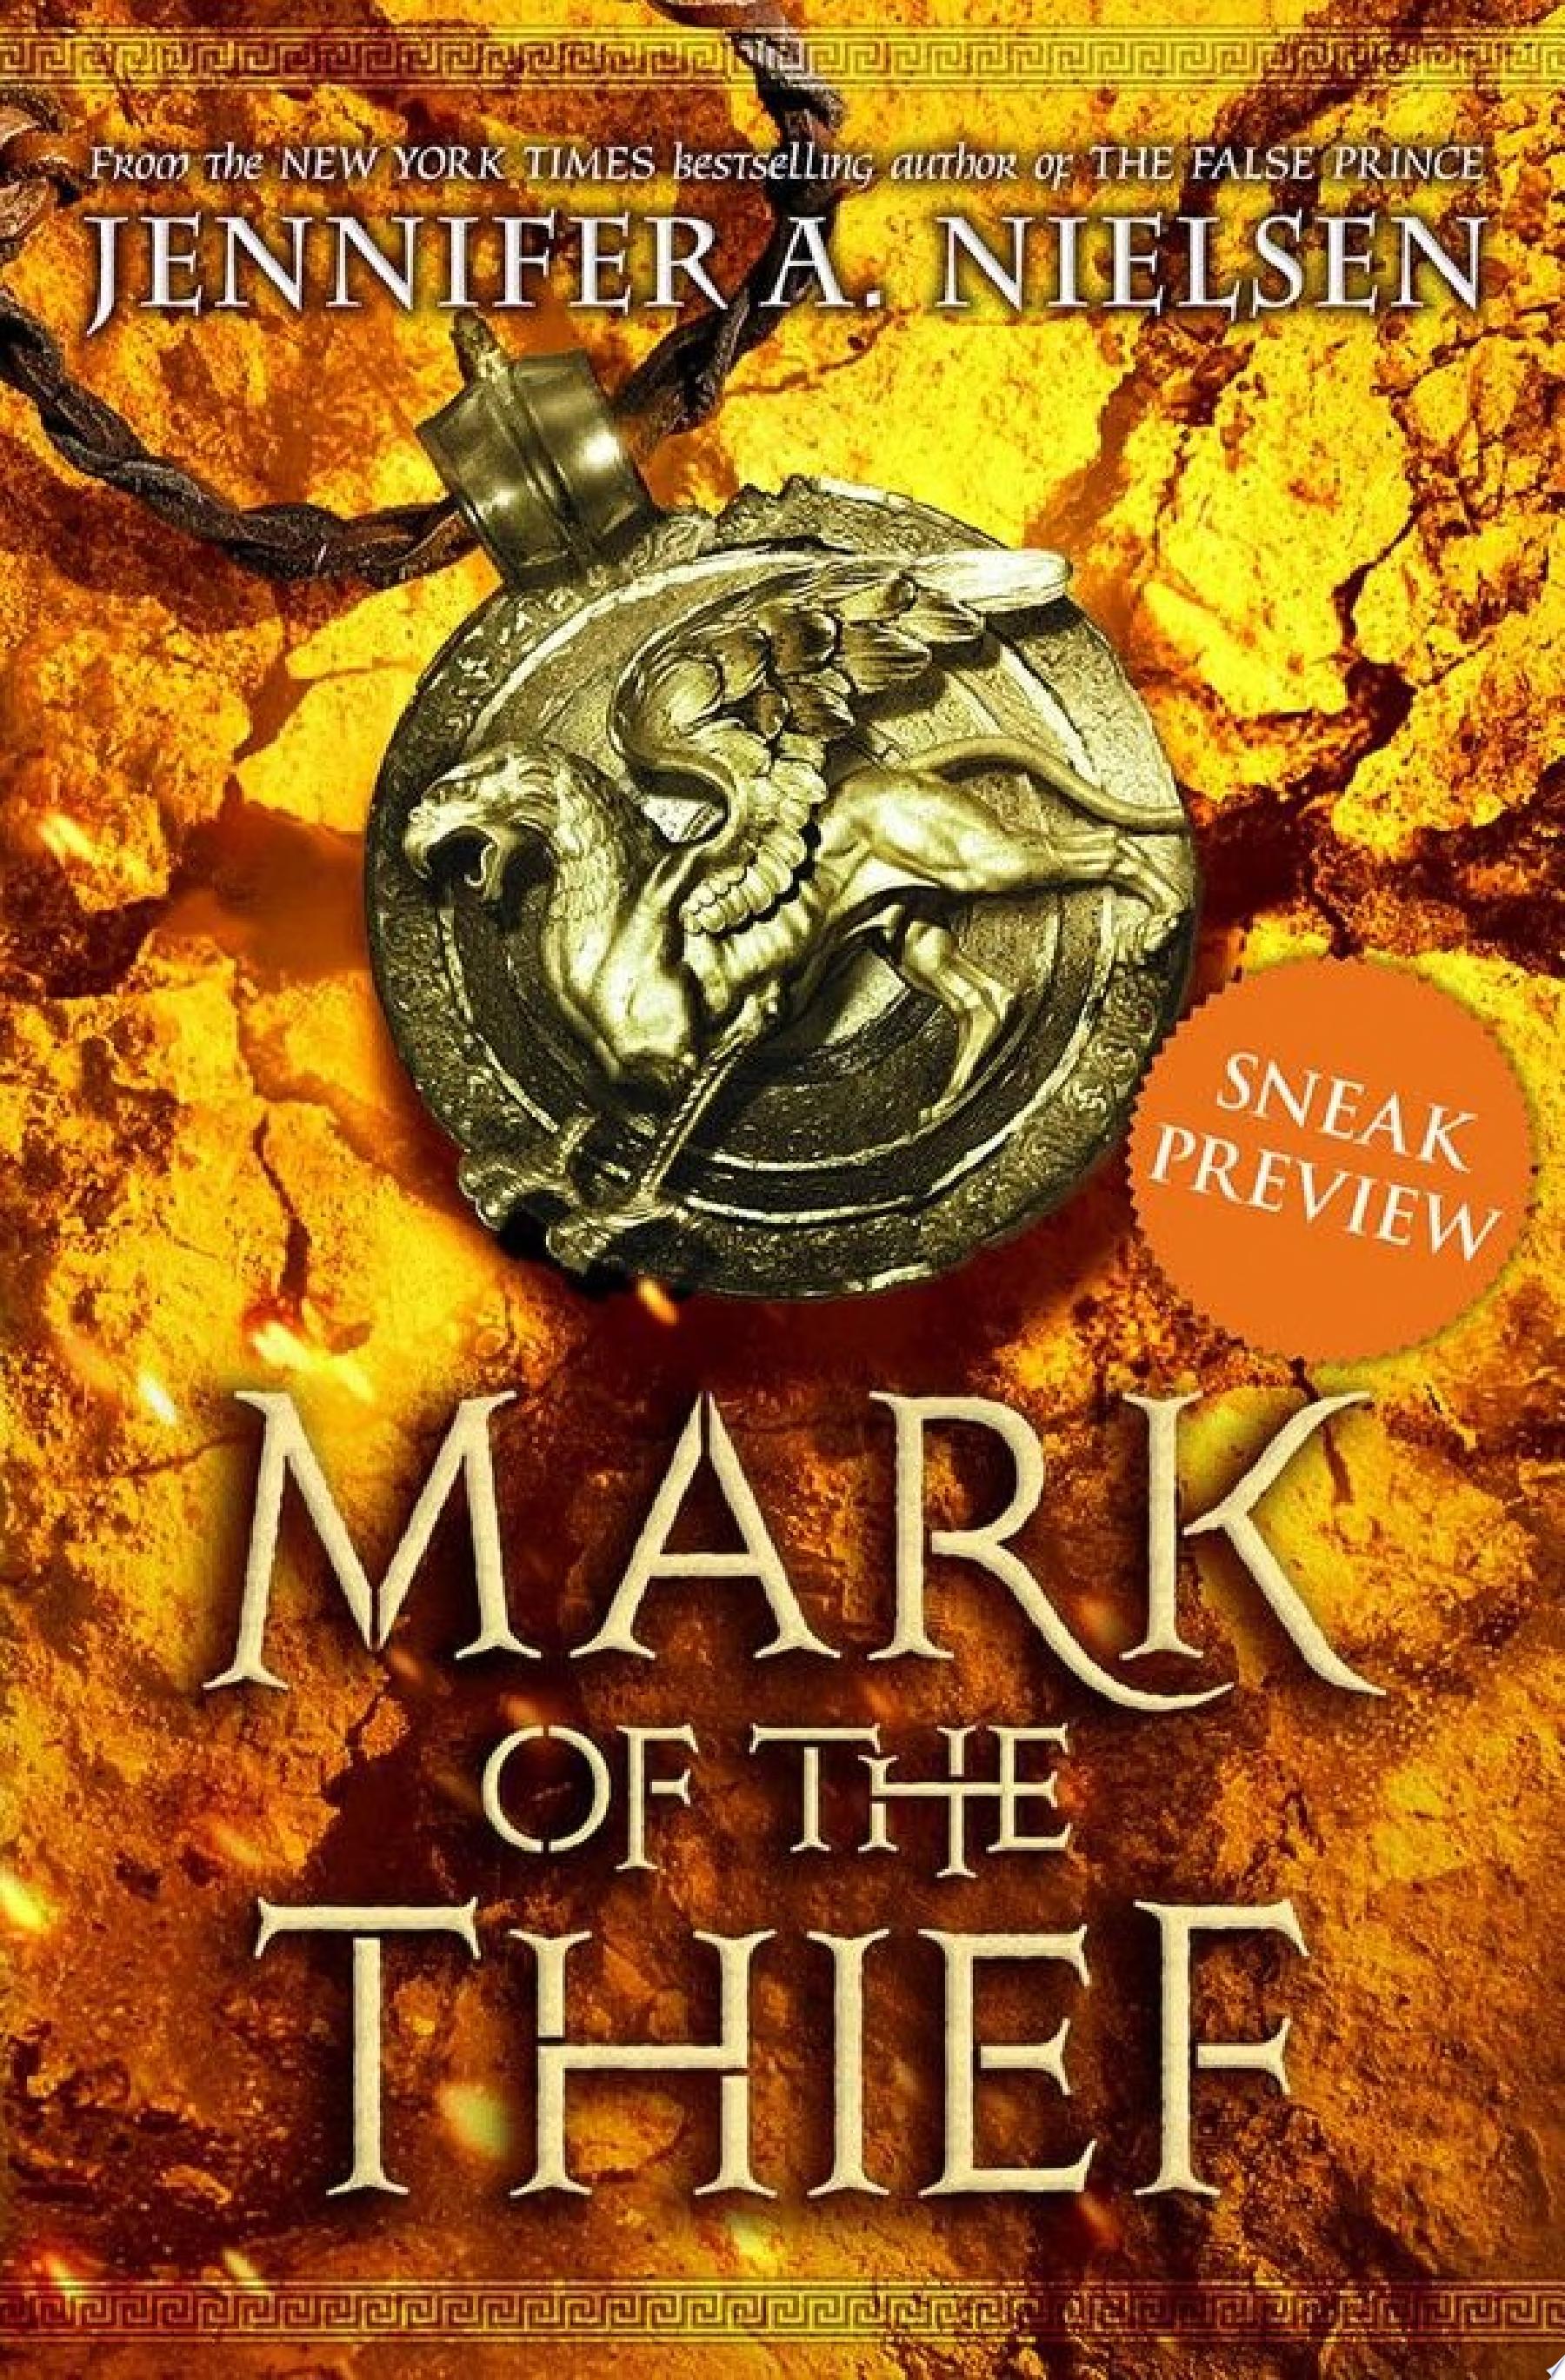 Image for "Mark of the Thief (Free Preview Edition)"